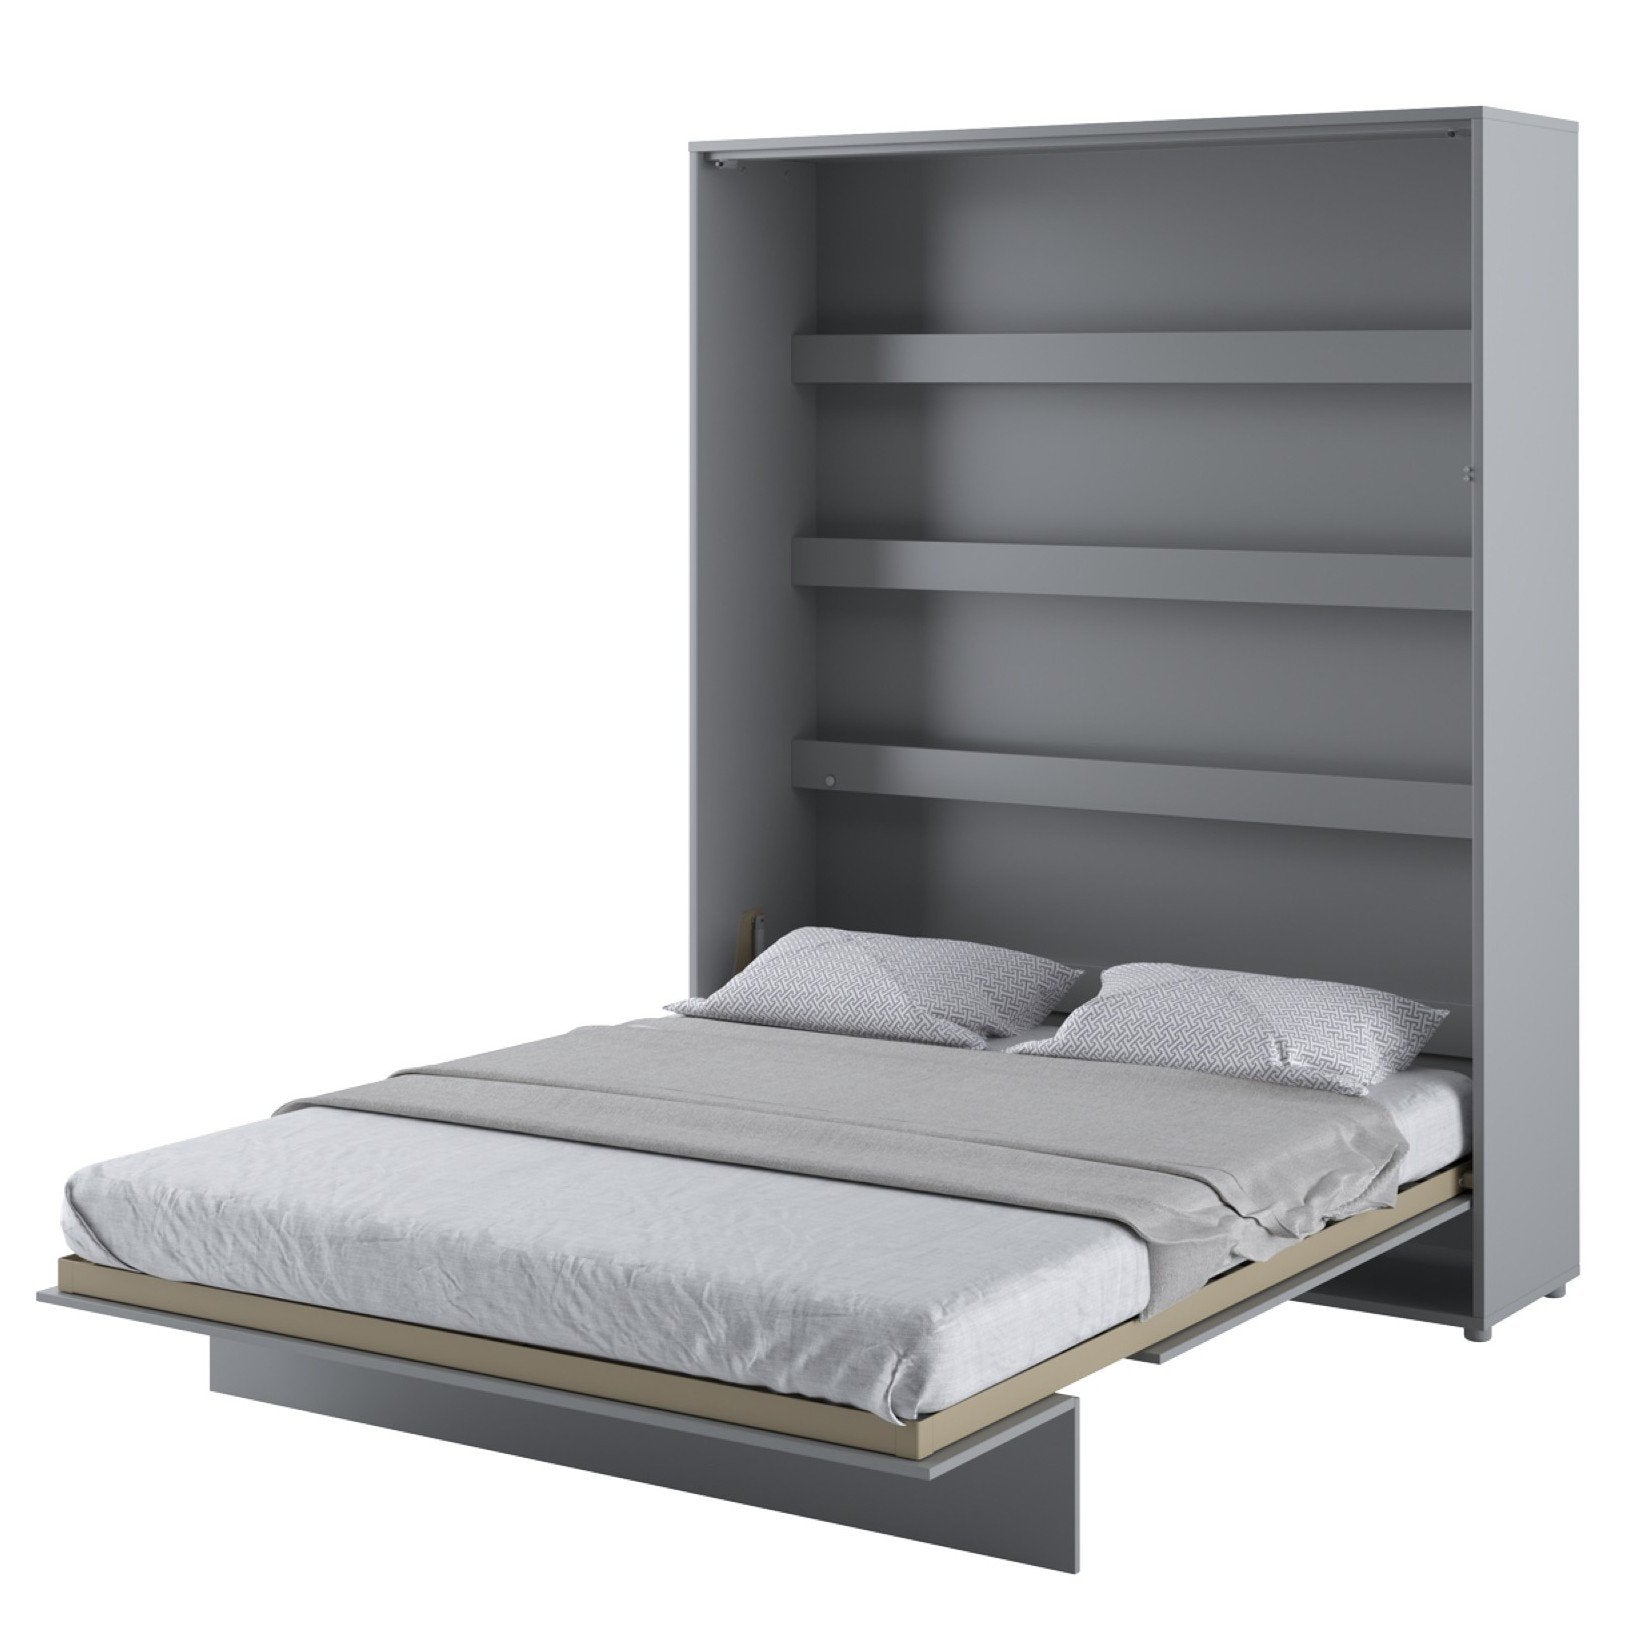 BC-13 Vertical Wall Bed Concept 180cm - Furniture Gold